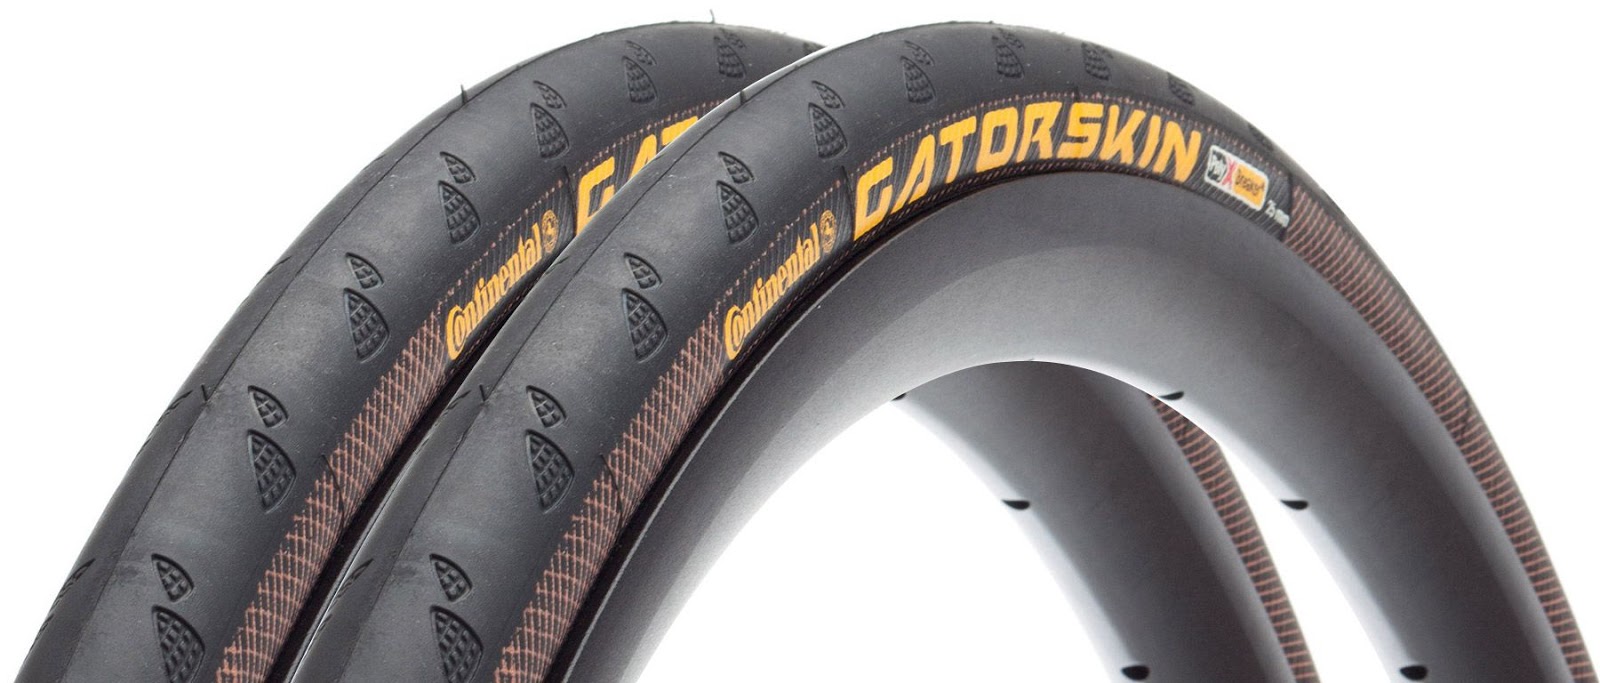 Continental ultracontact uc6. Continental Gatorskin 700x25. Continental ULTRACONTACT uc6 175/65r14 82t. Gatorskin 25. Gatorskin Continental 29.